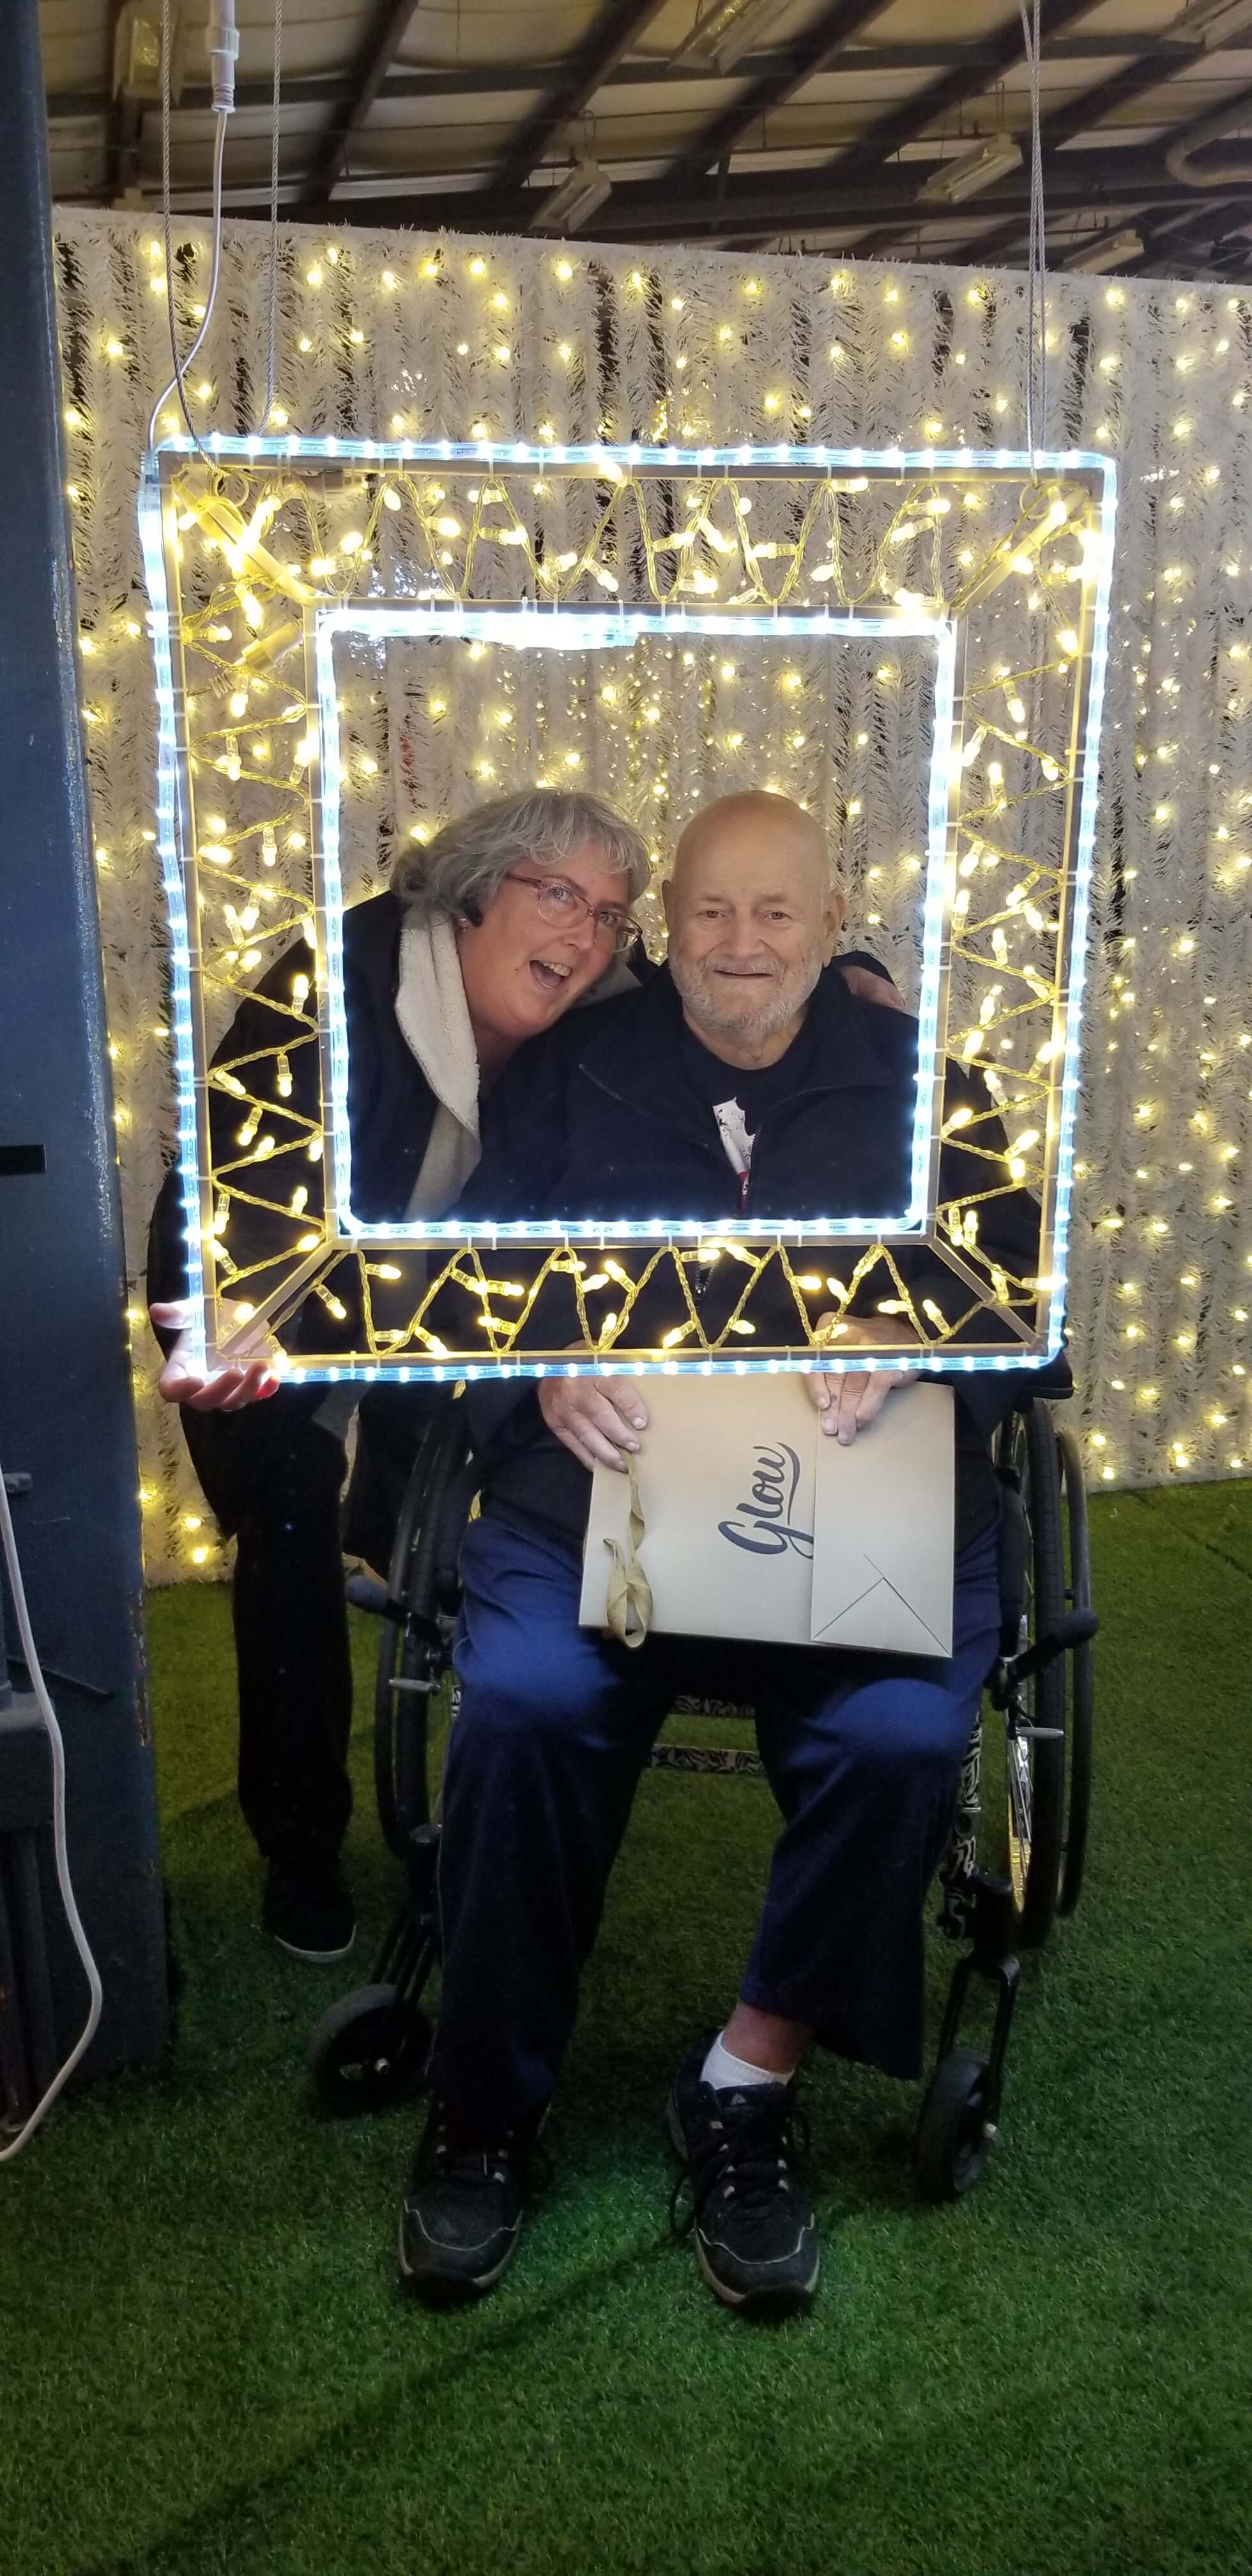 Owner Susan and senior male posing in glow picture frame